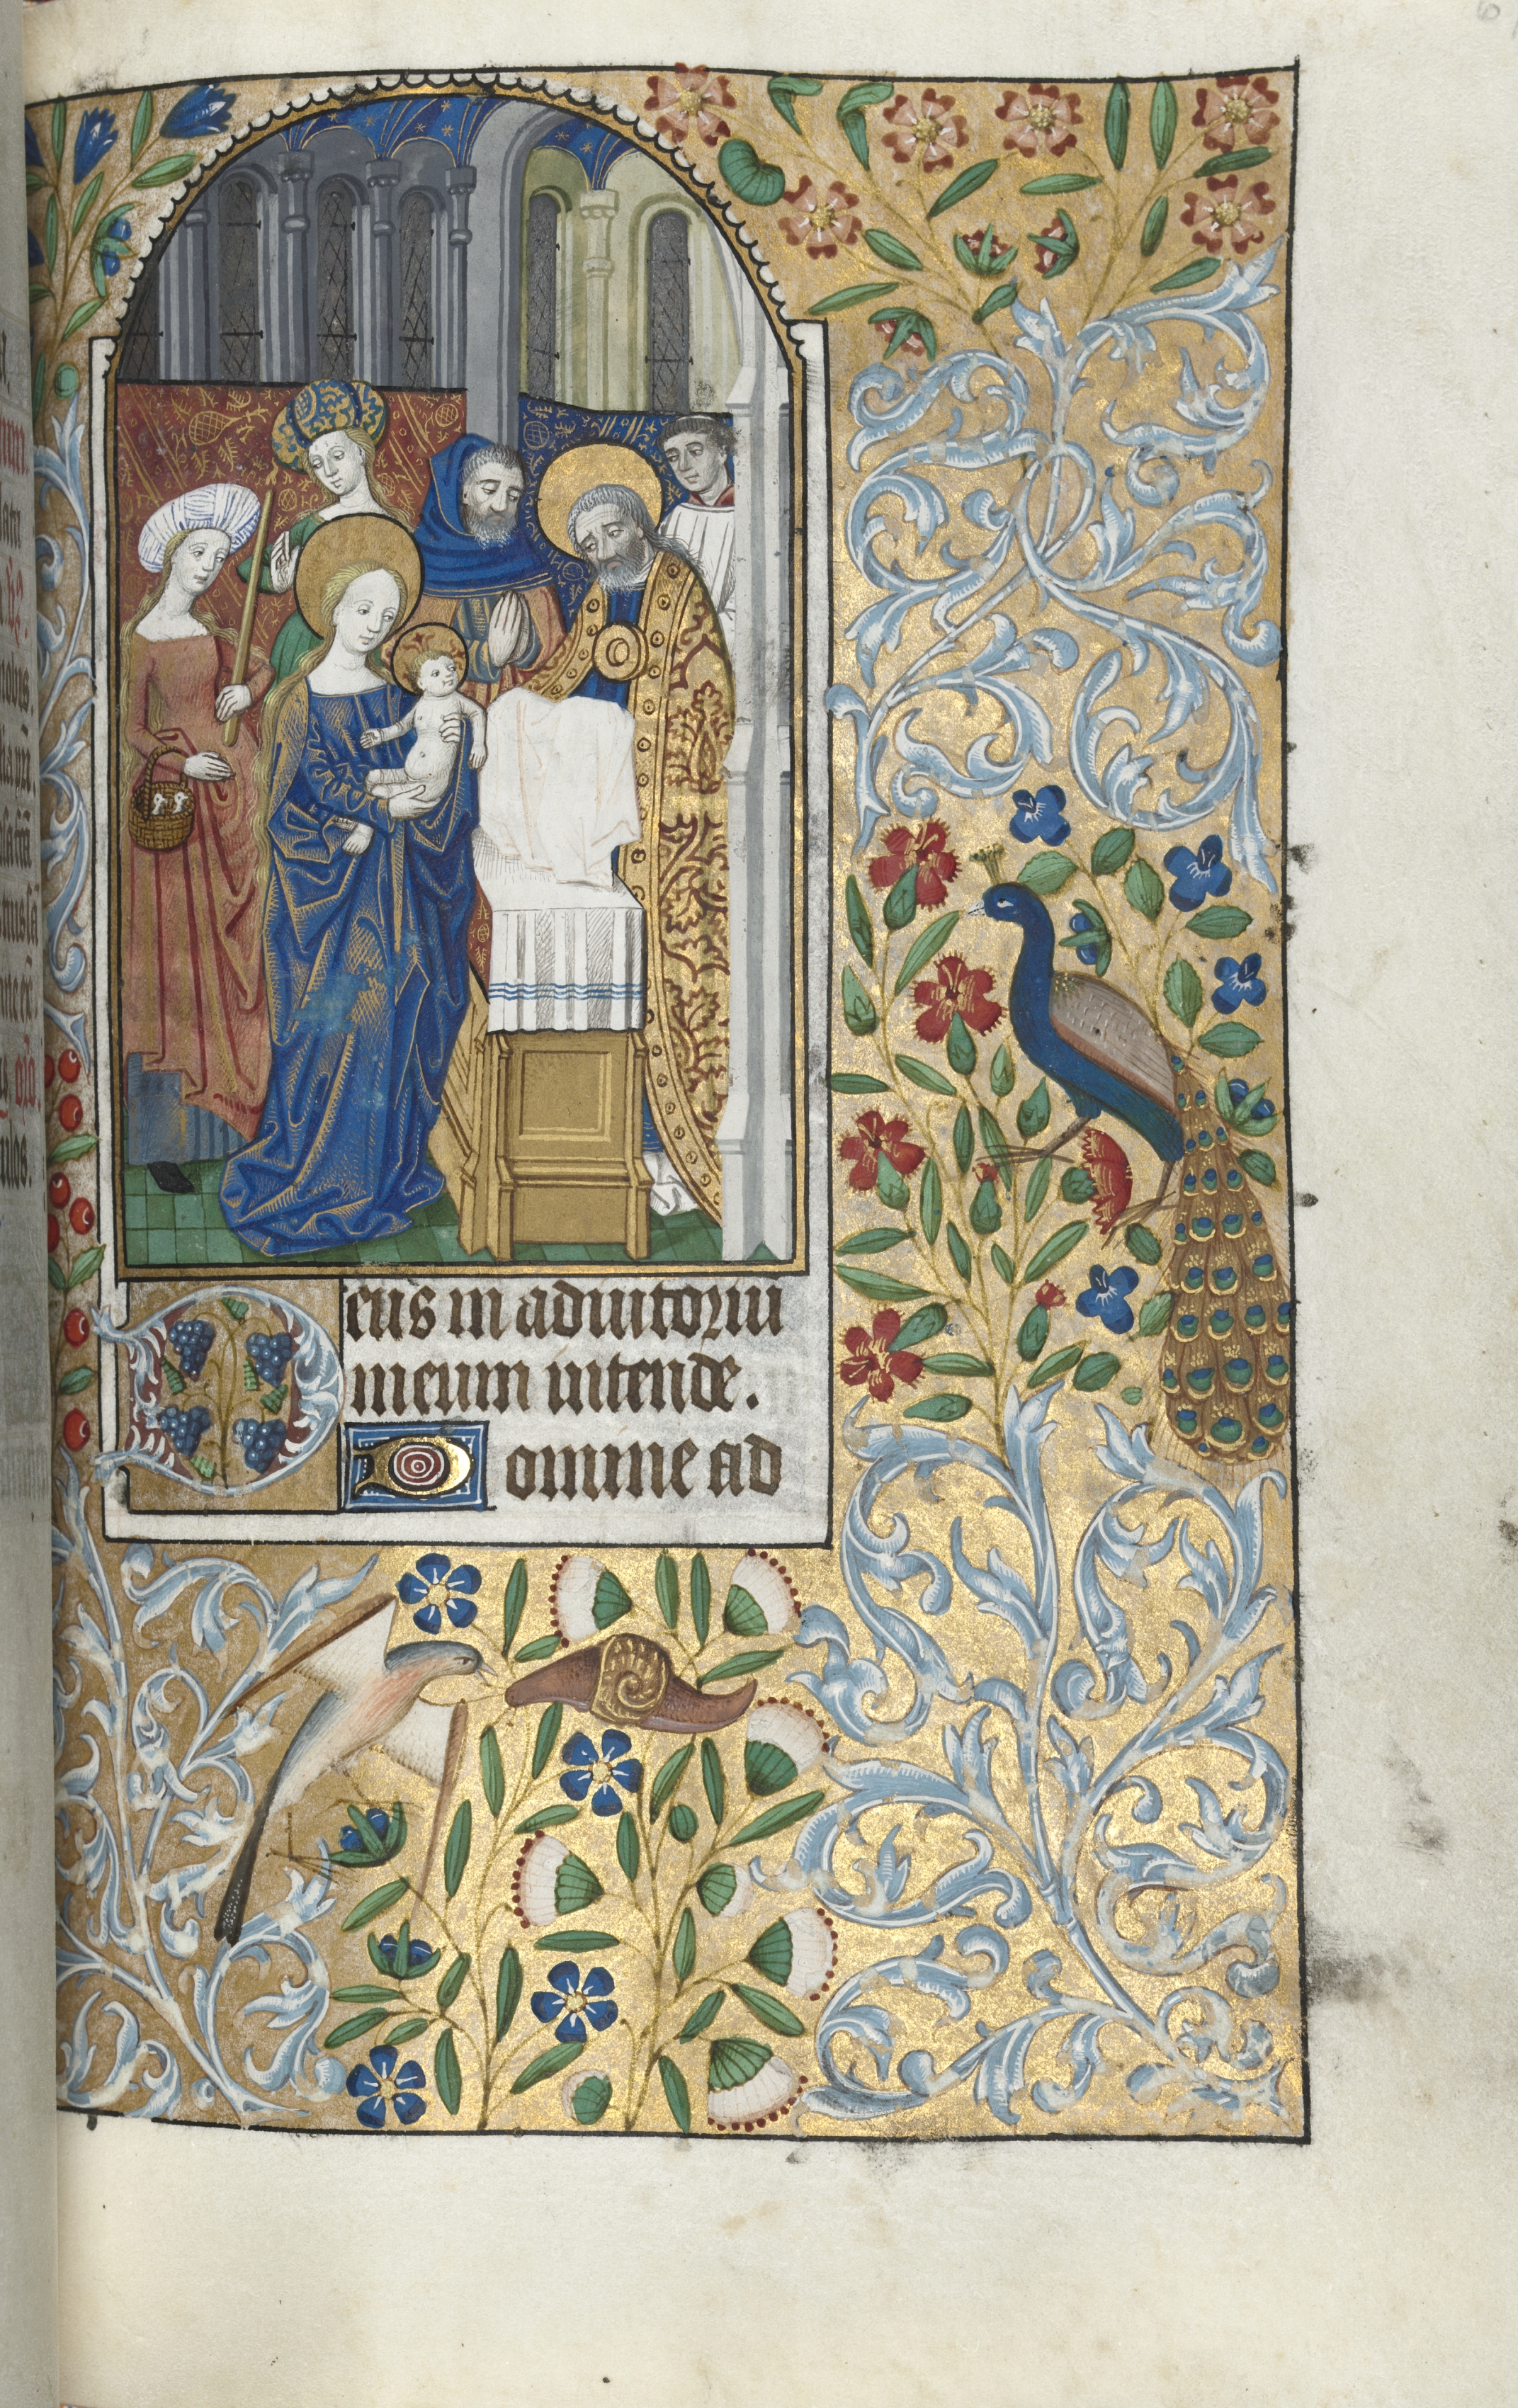 Book of Hours (Use of Rouen): fol. 67r, Opening of None, Presentation of the Christ Child in the Temple